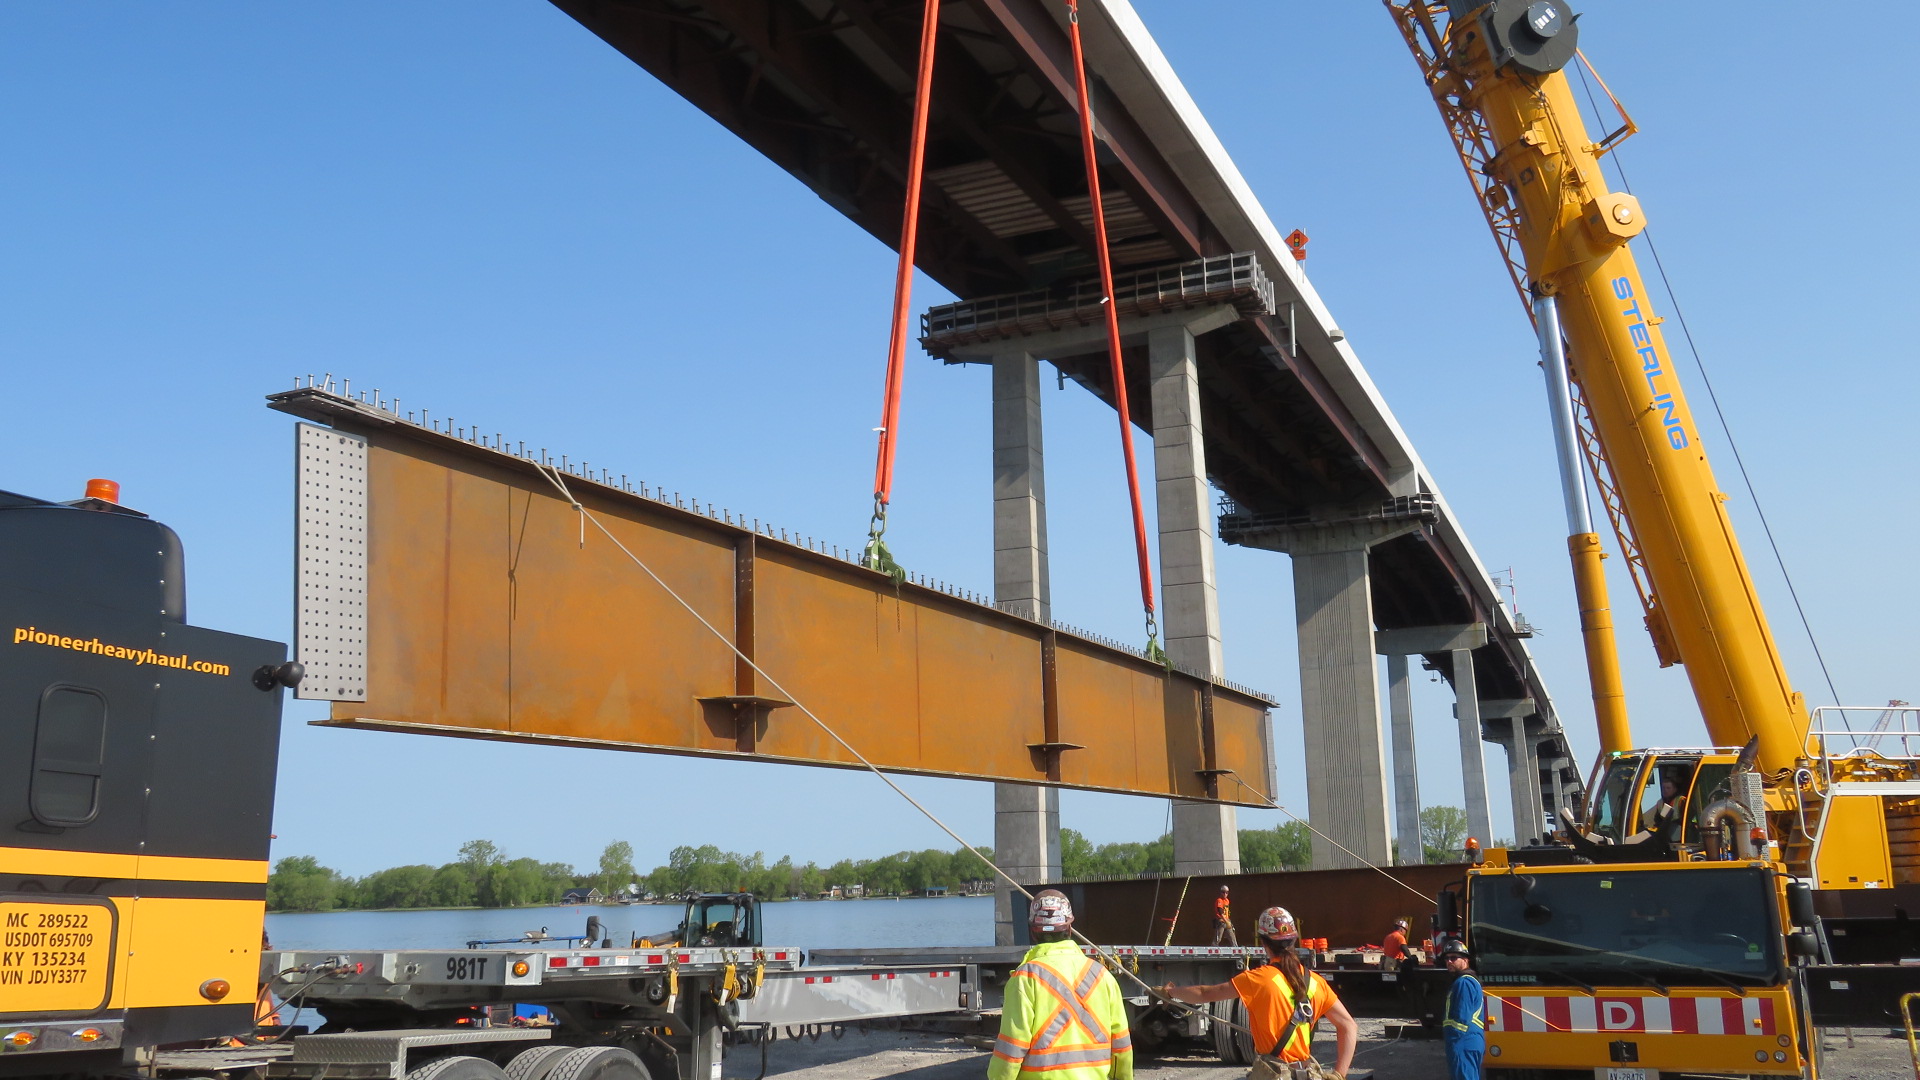 Removing the second girder from the truck